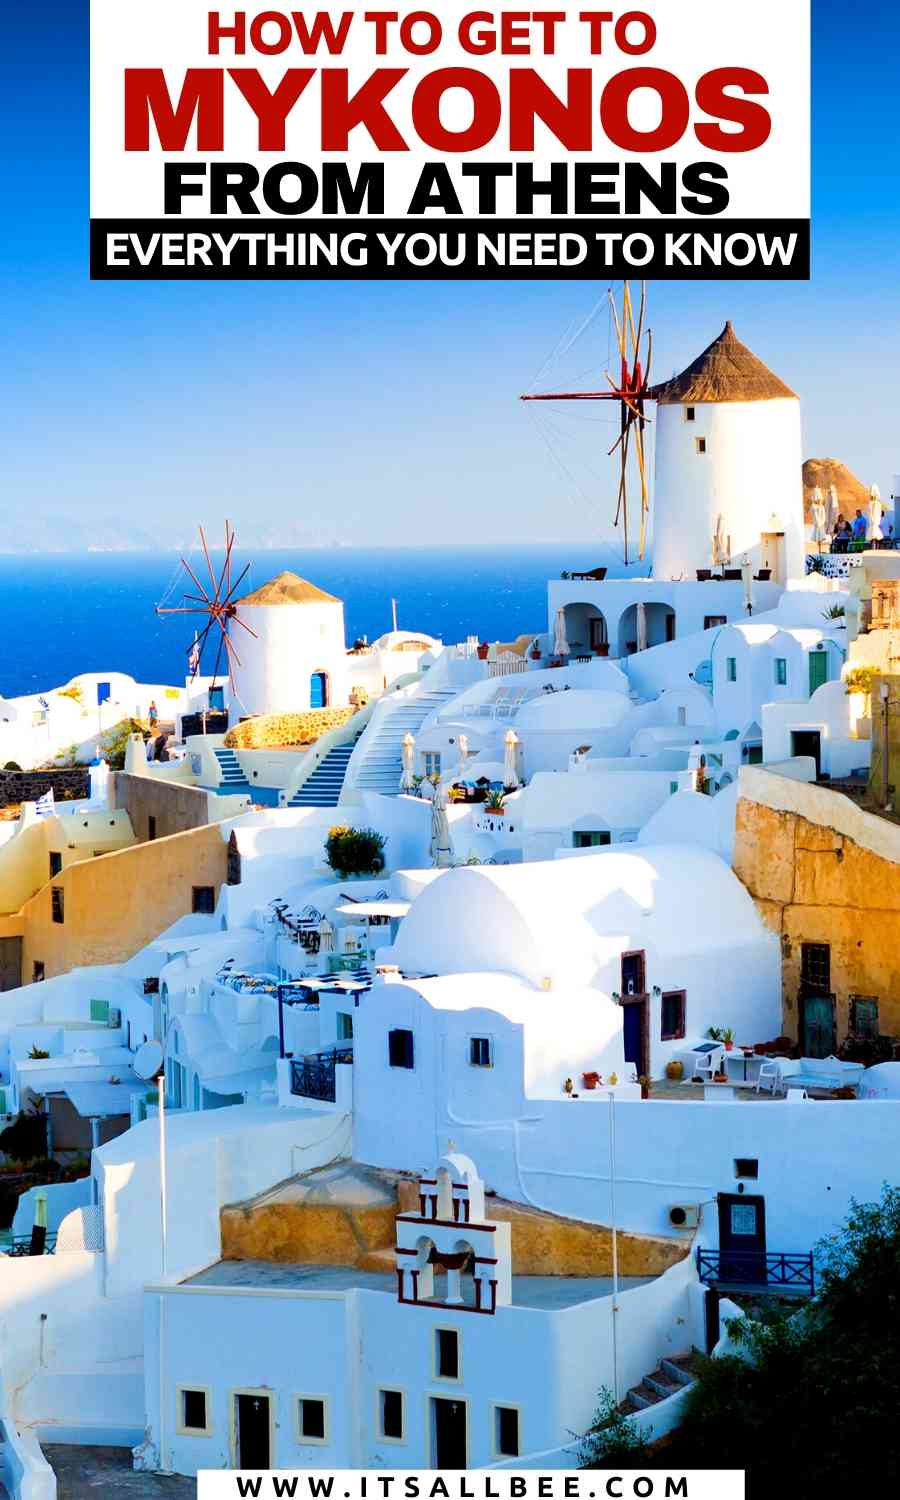 Get to Mykonos from Athens